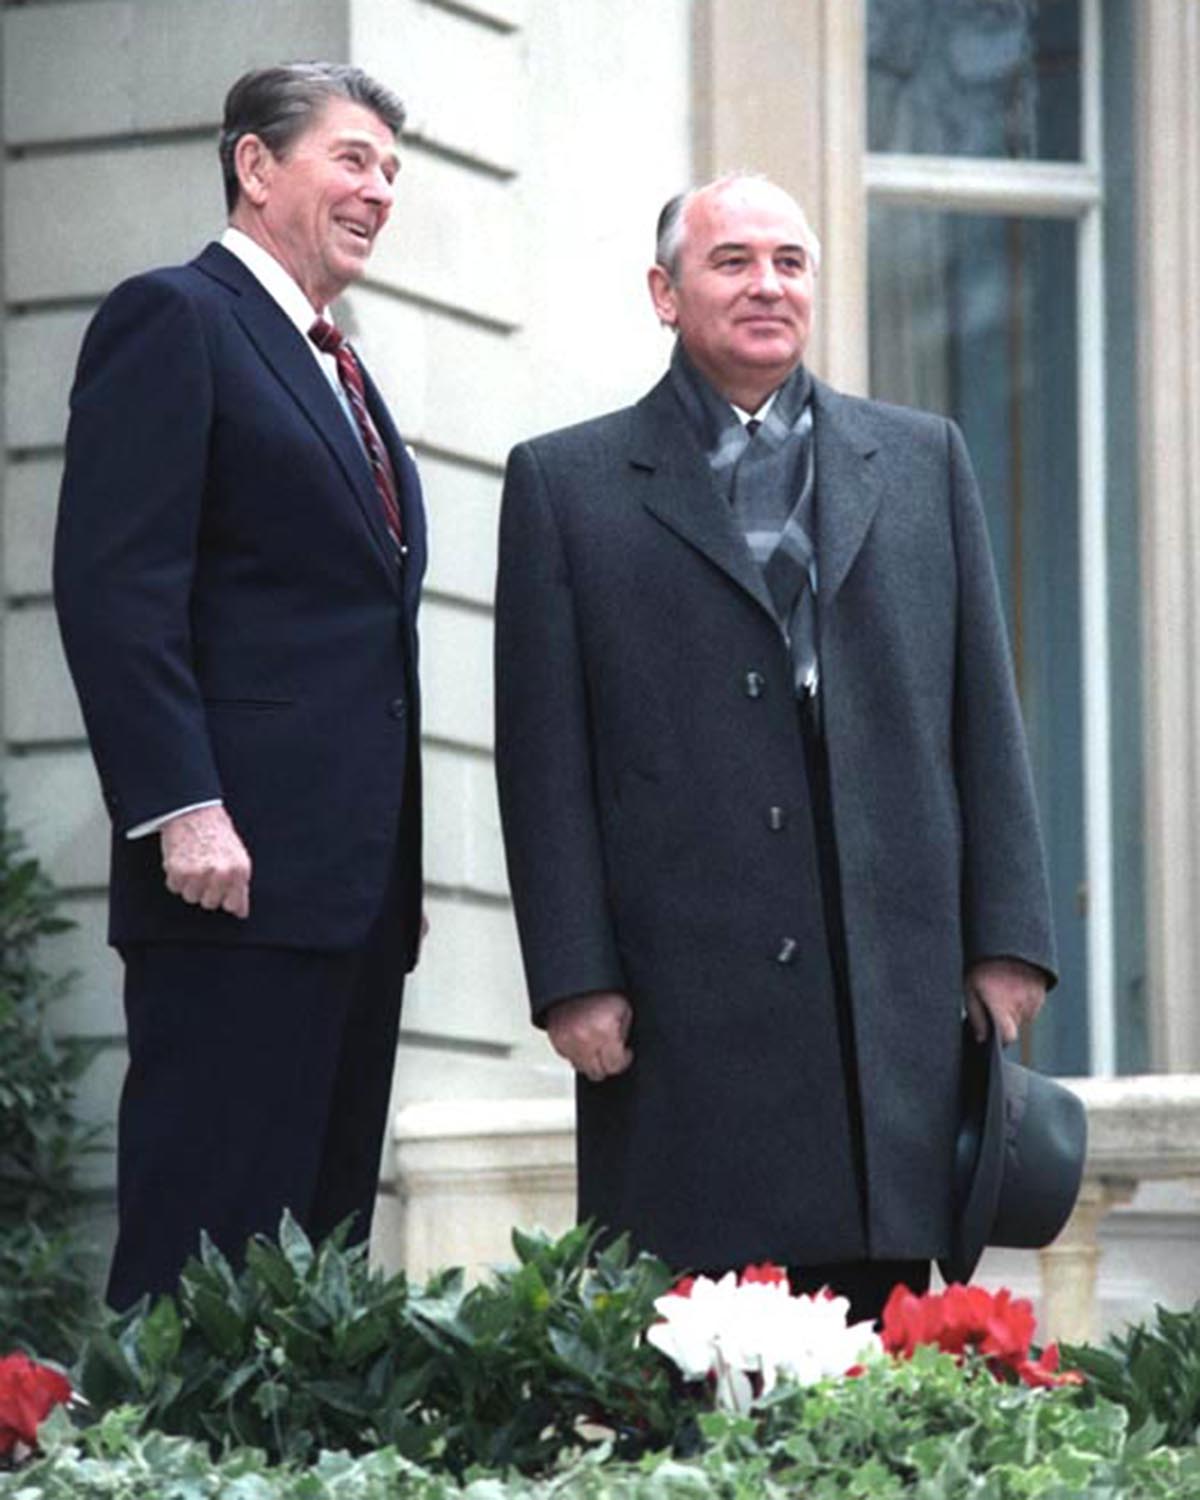 President Ronald Reagan smiles during his first meeting with Mikhail Gorbachev at Fleur D'Eau during the Geneva Summit in Switzerland on Nov. 19,1985. Photo courtesy of Wikimedia Commons